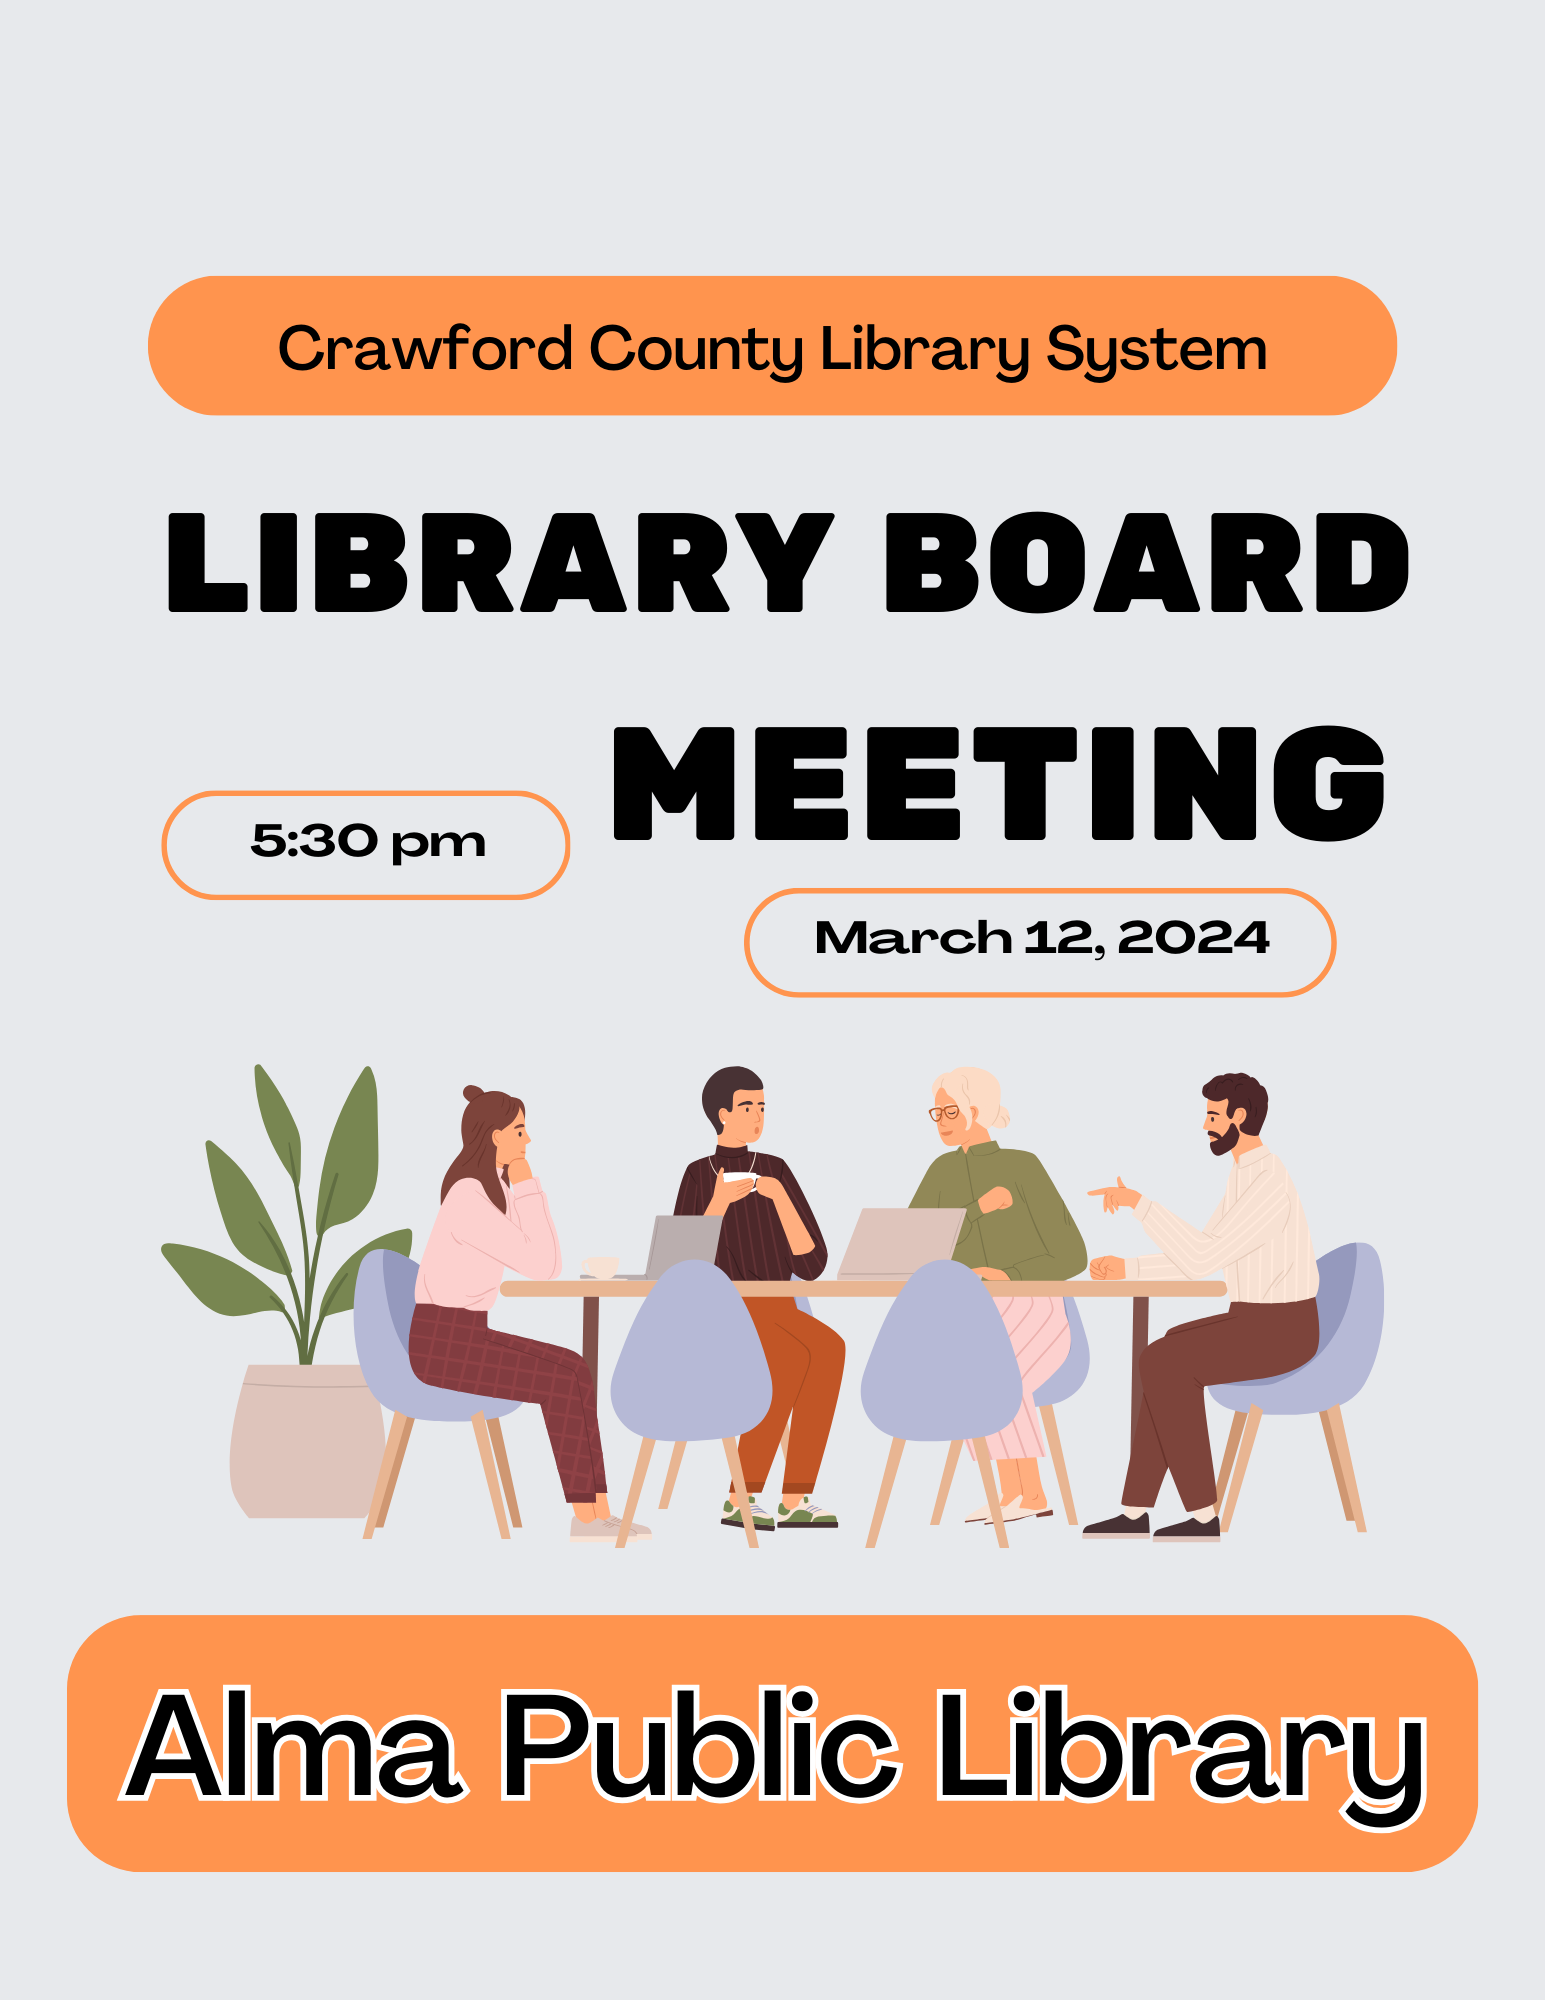 Library Board meeting 5:30 pm March 12, 2024 at the Alma Public Library 